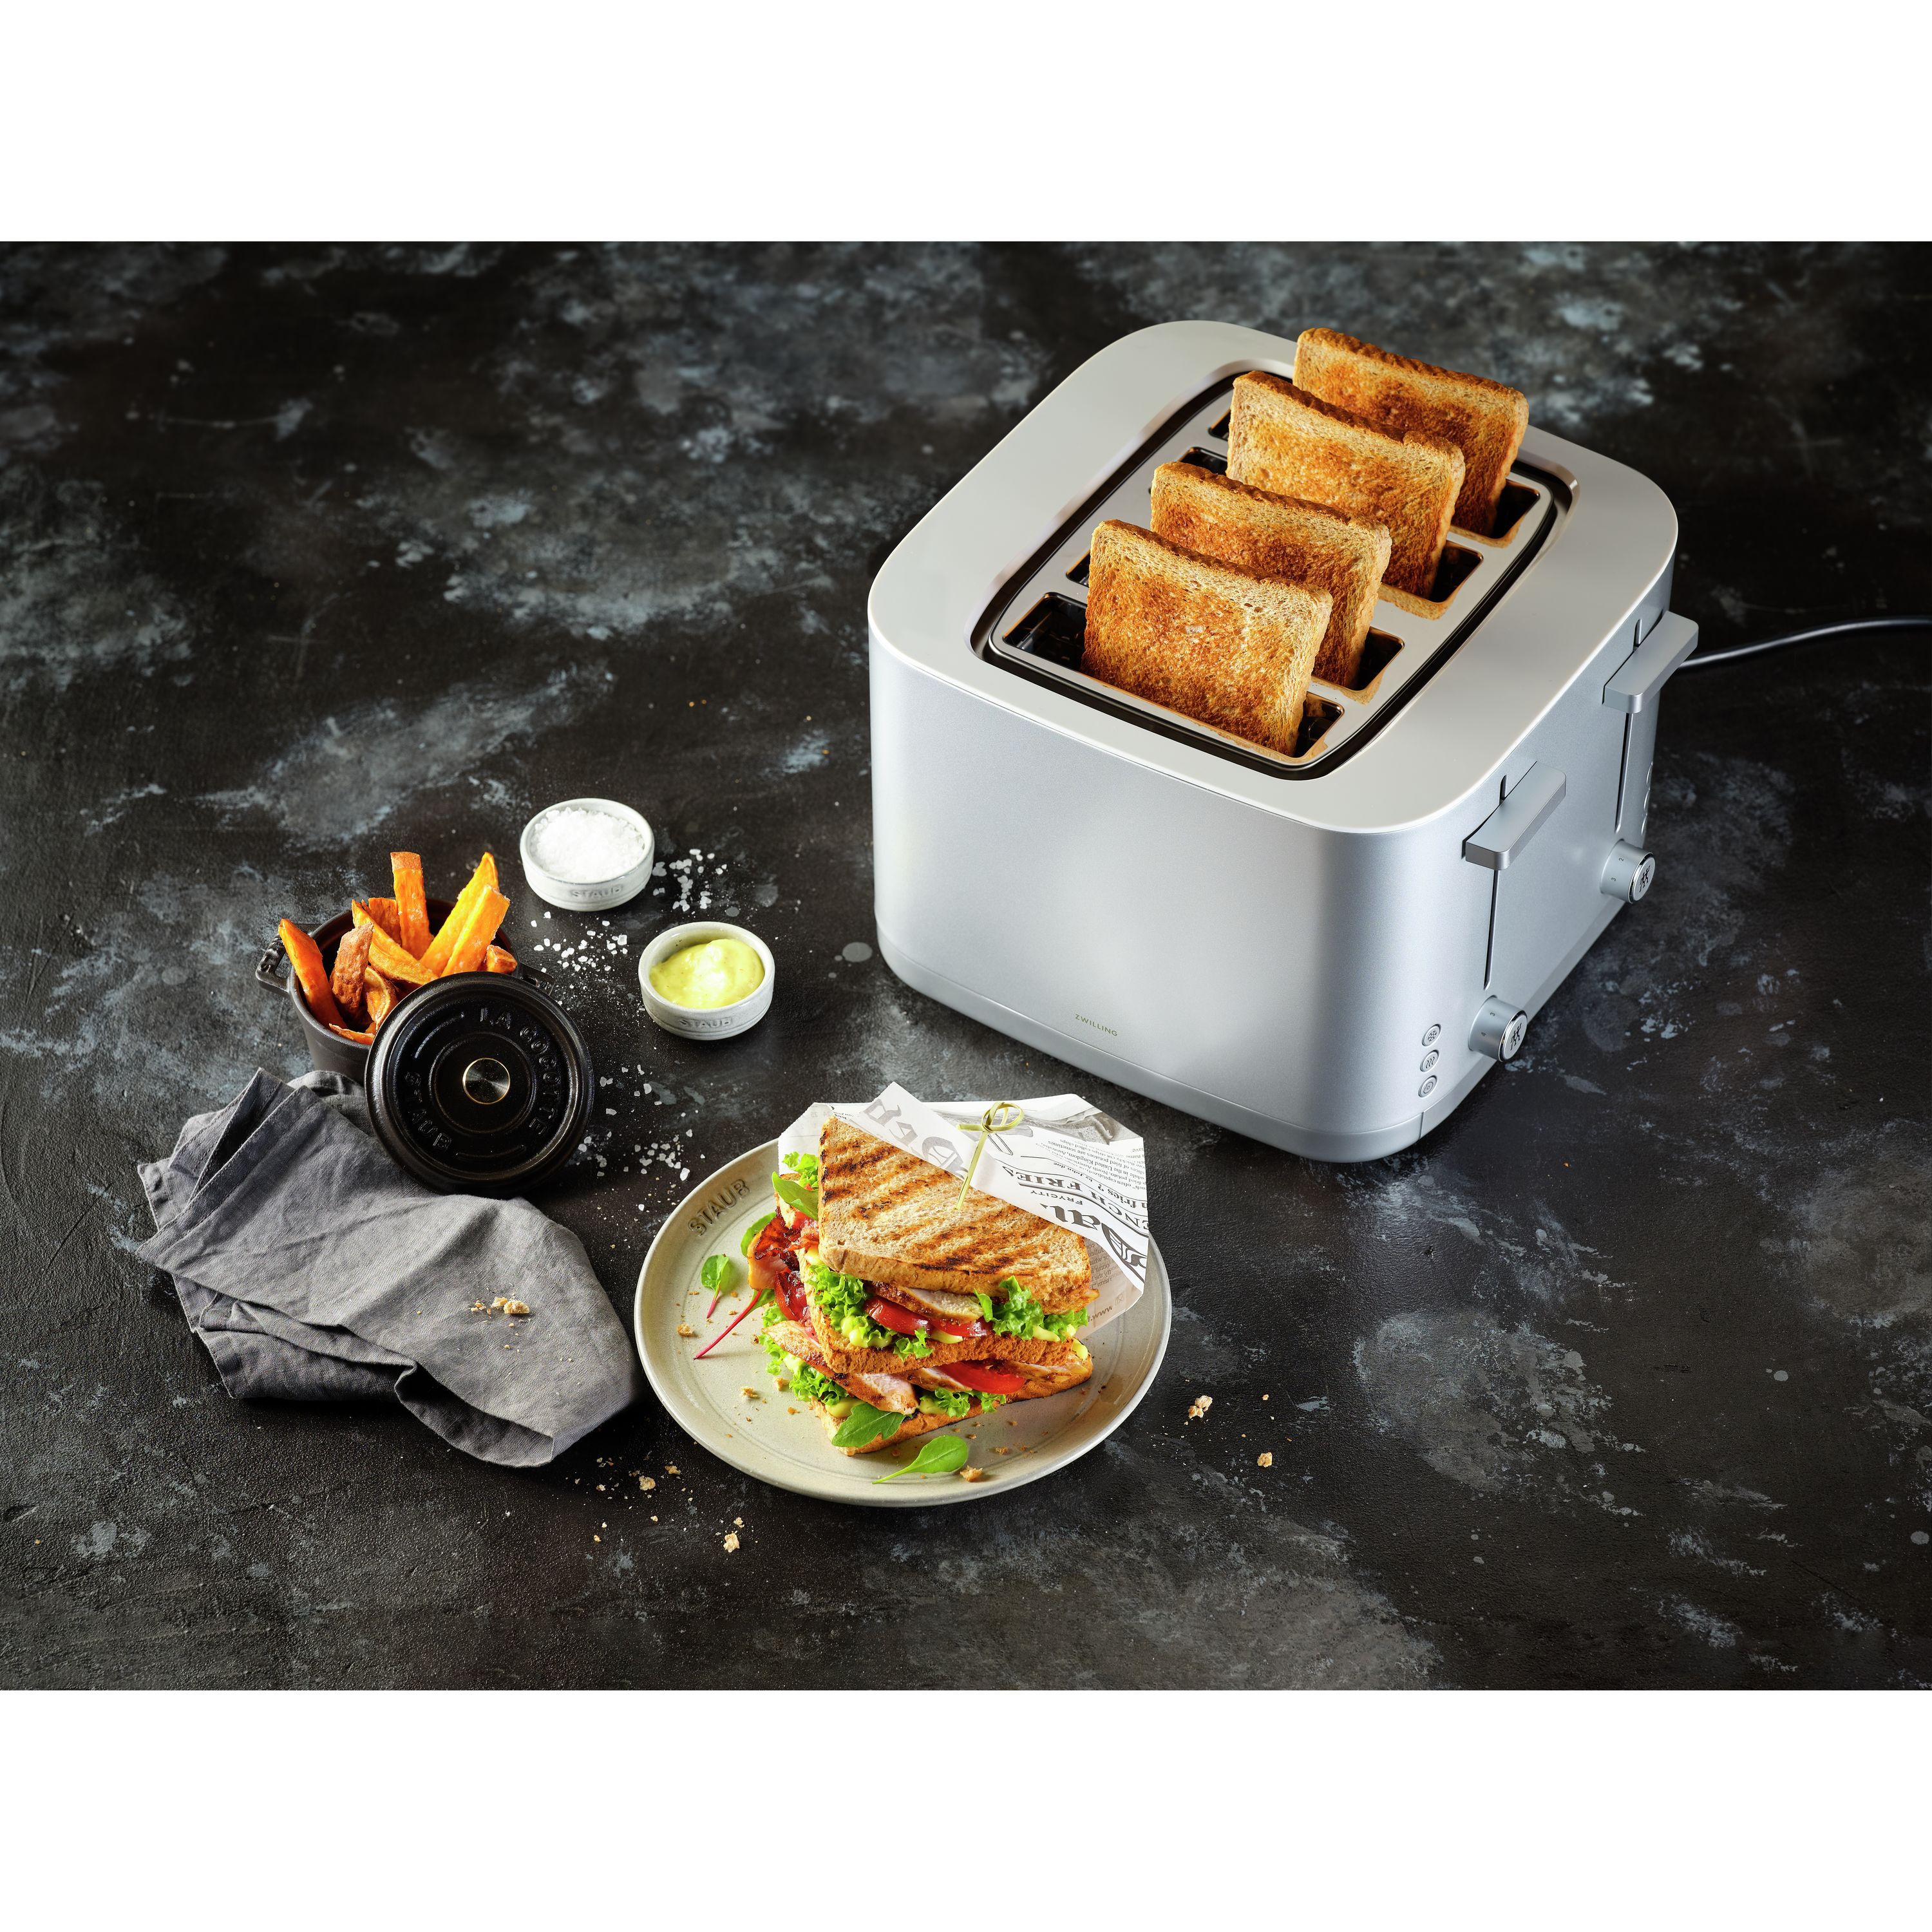 ZWILLING Enfinigy Cool Touch, Long Slot 4-slice Toaster, Wide Slot